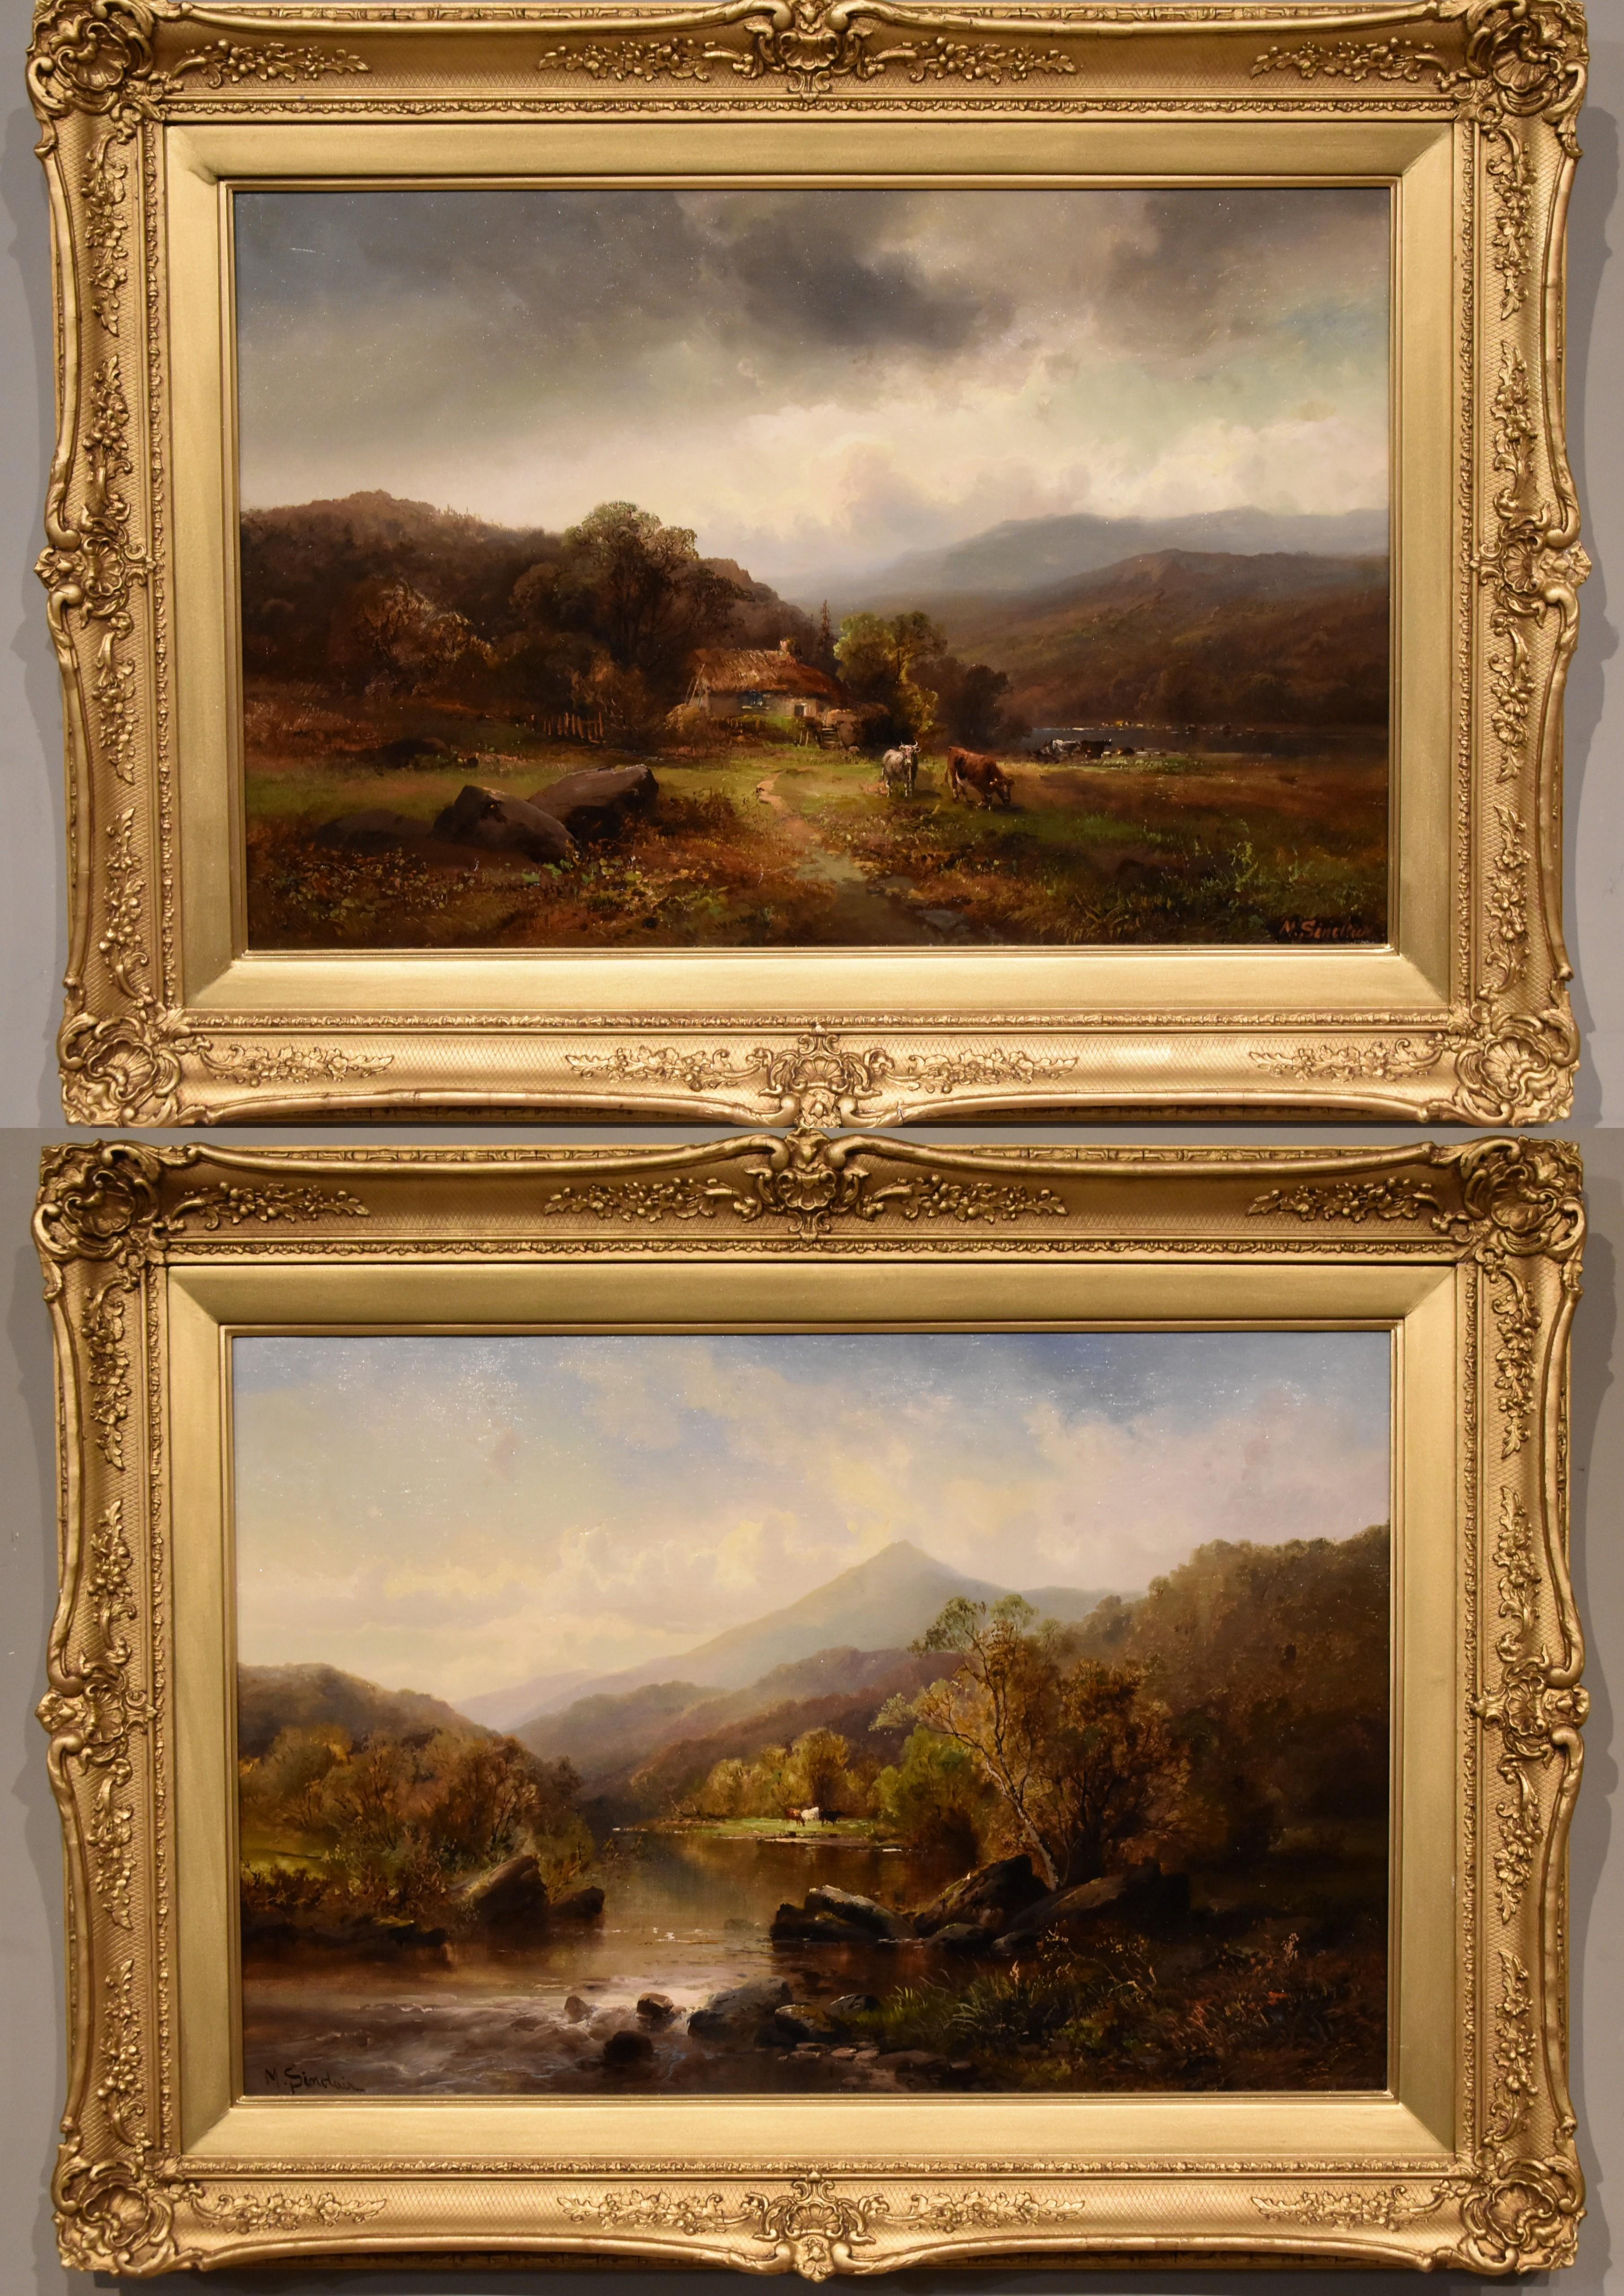 Oil Painting Pair by Max Sinclair "The Lledr Valley, North Wales" who flourished 1864 - 1910 North West painter of North Wales landscapes castle scenes and coastal marines. In many art collections in Wales and Liverpool. Both oil on canvas. Signed